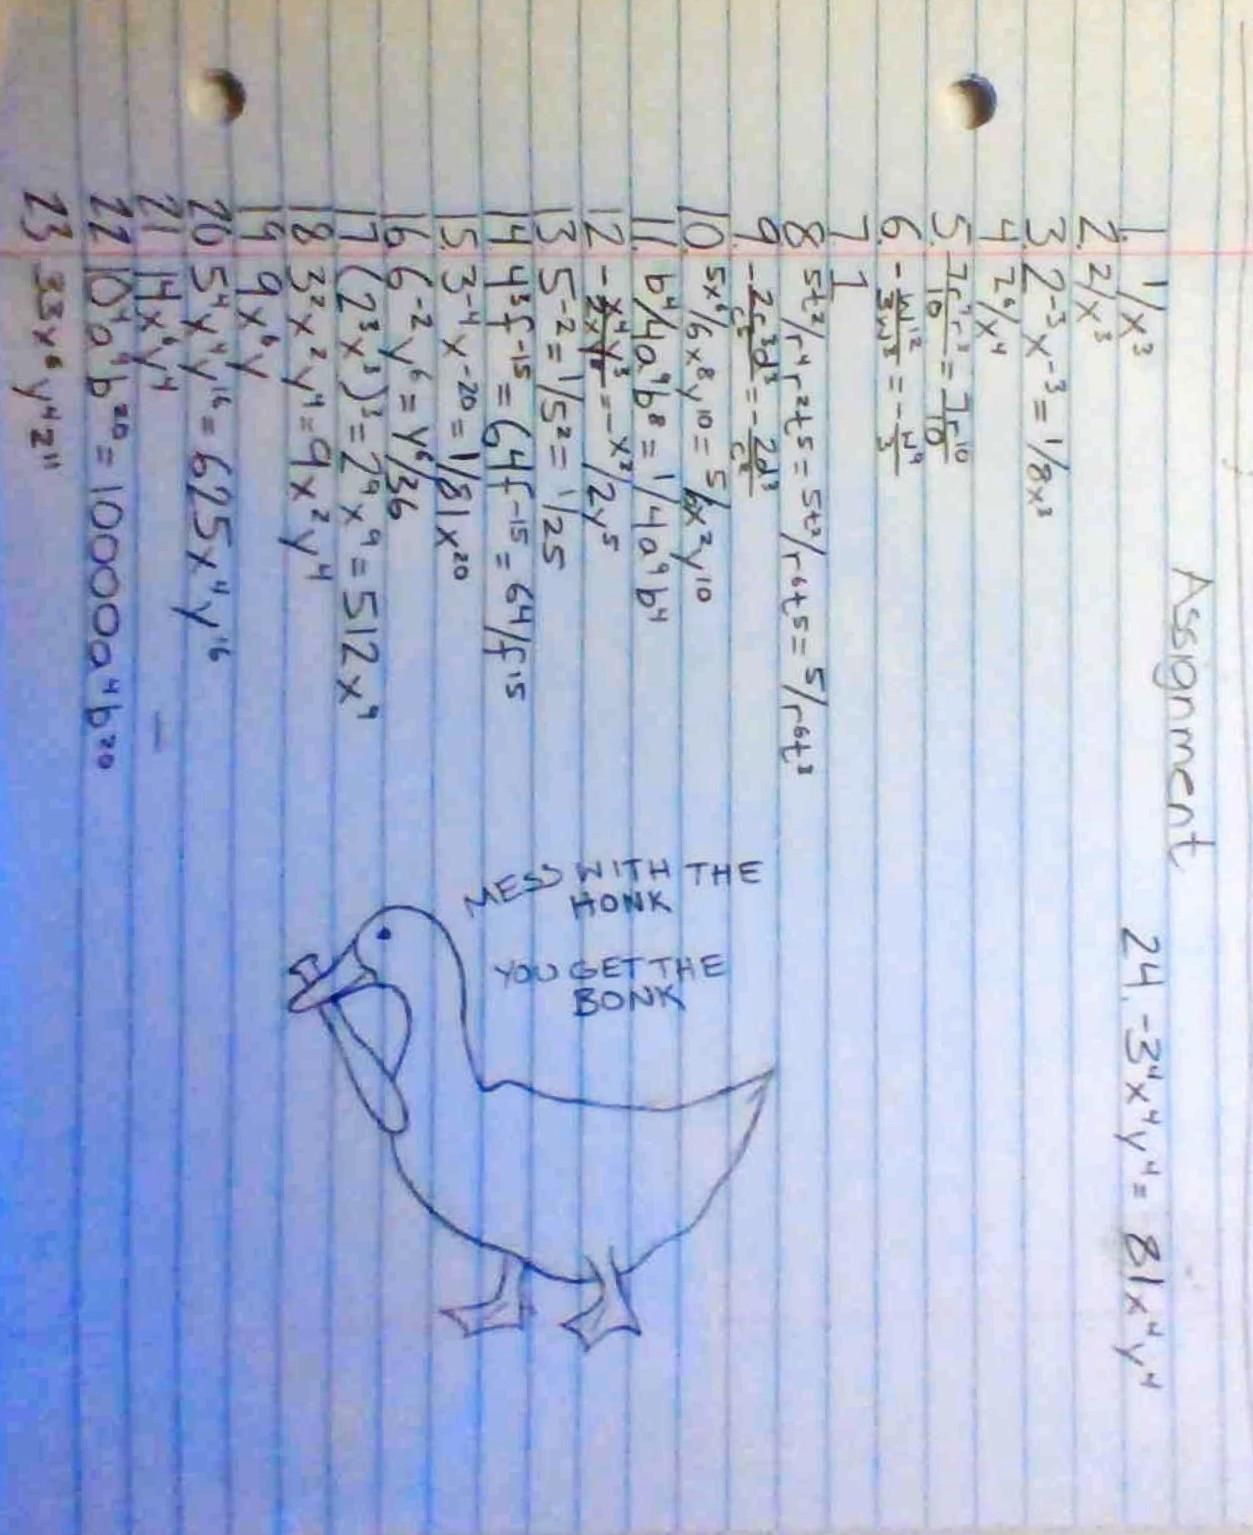 My math teacher said that we needed to draw a duck on our assignment to receive credit, so this is what I made.